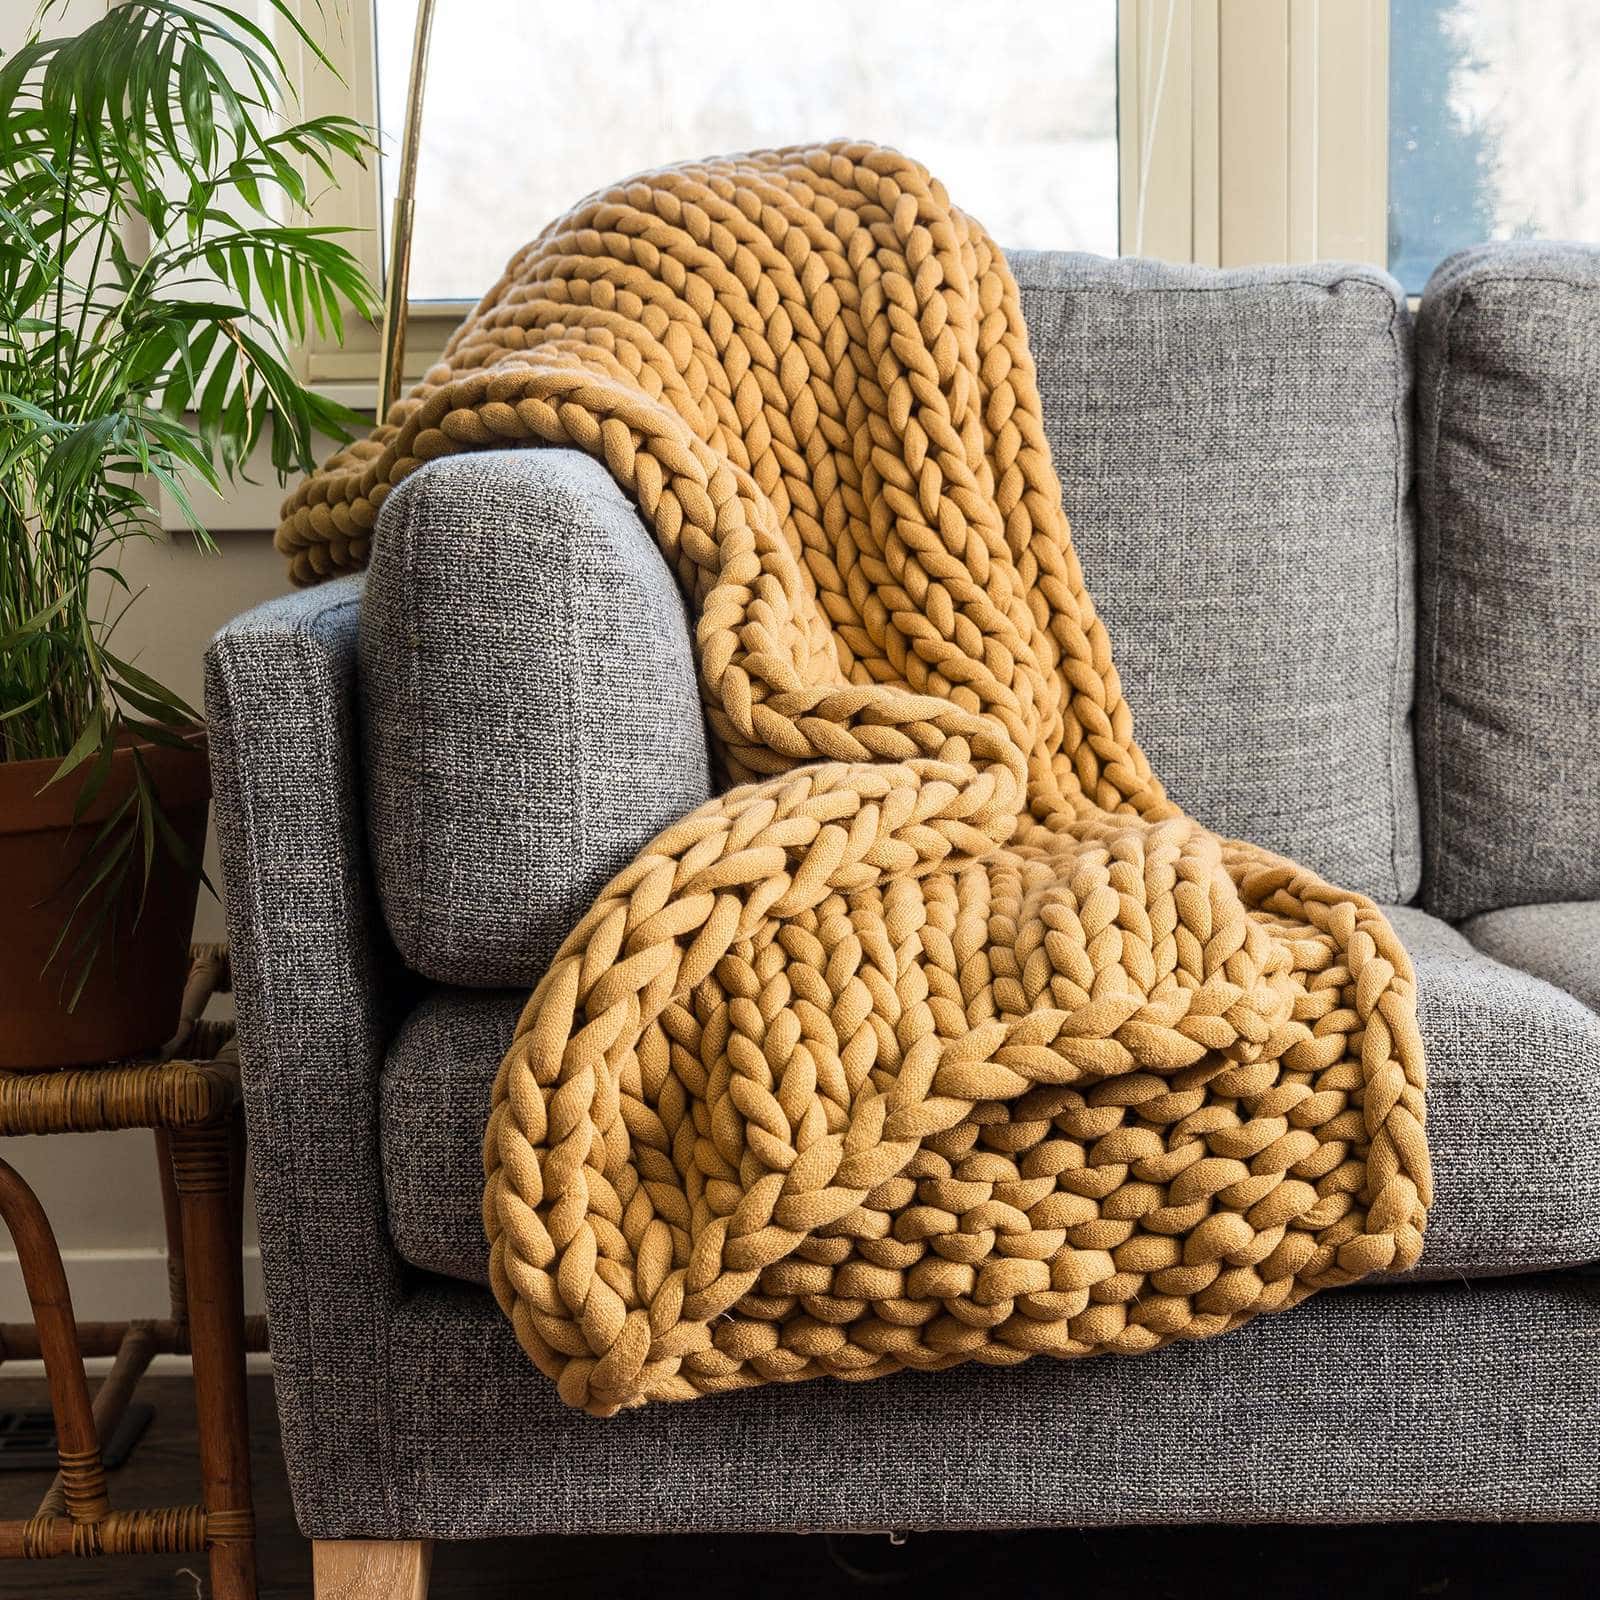 Layer on a Chunky Knit Throw